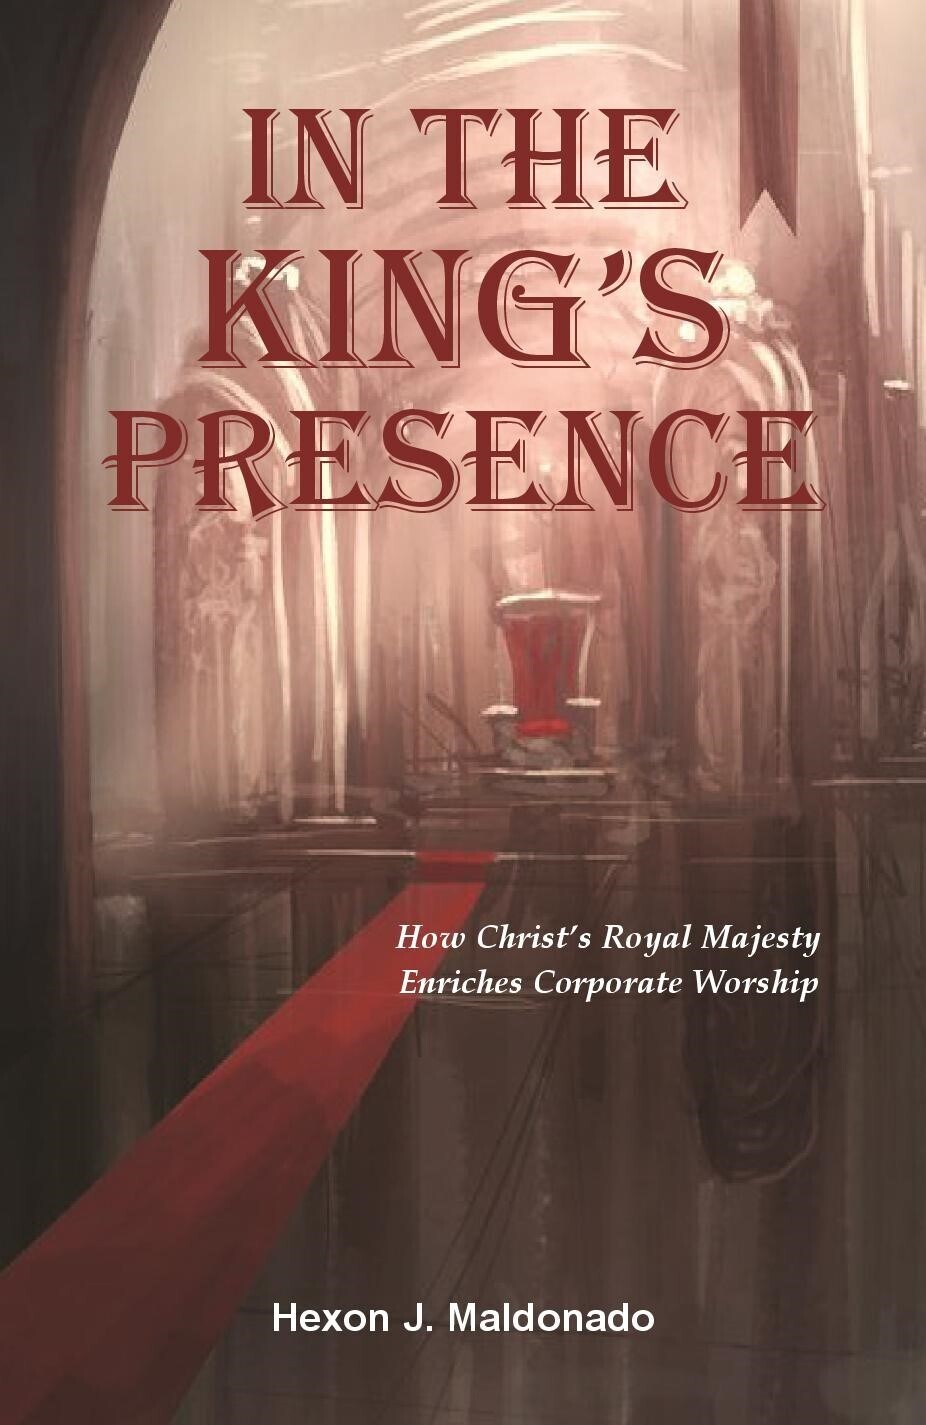 In the King's Presence: How Christ's Royal Majesty Enriches Corporate Worship (soft-cover)